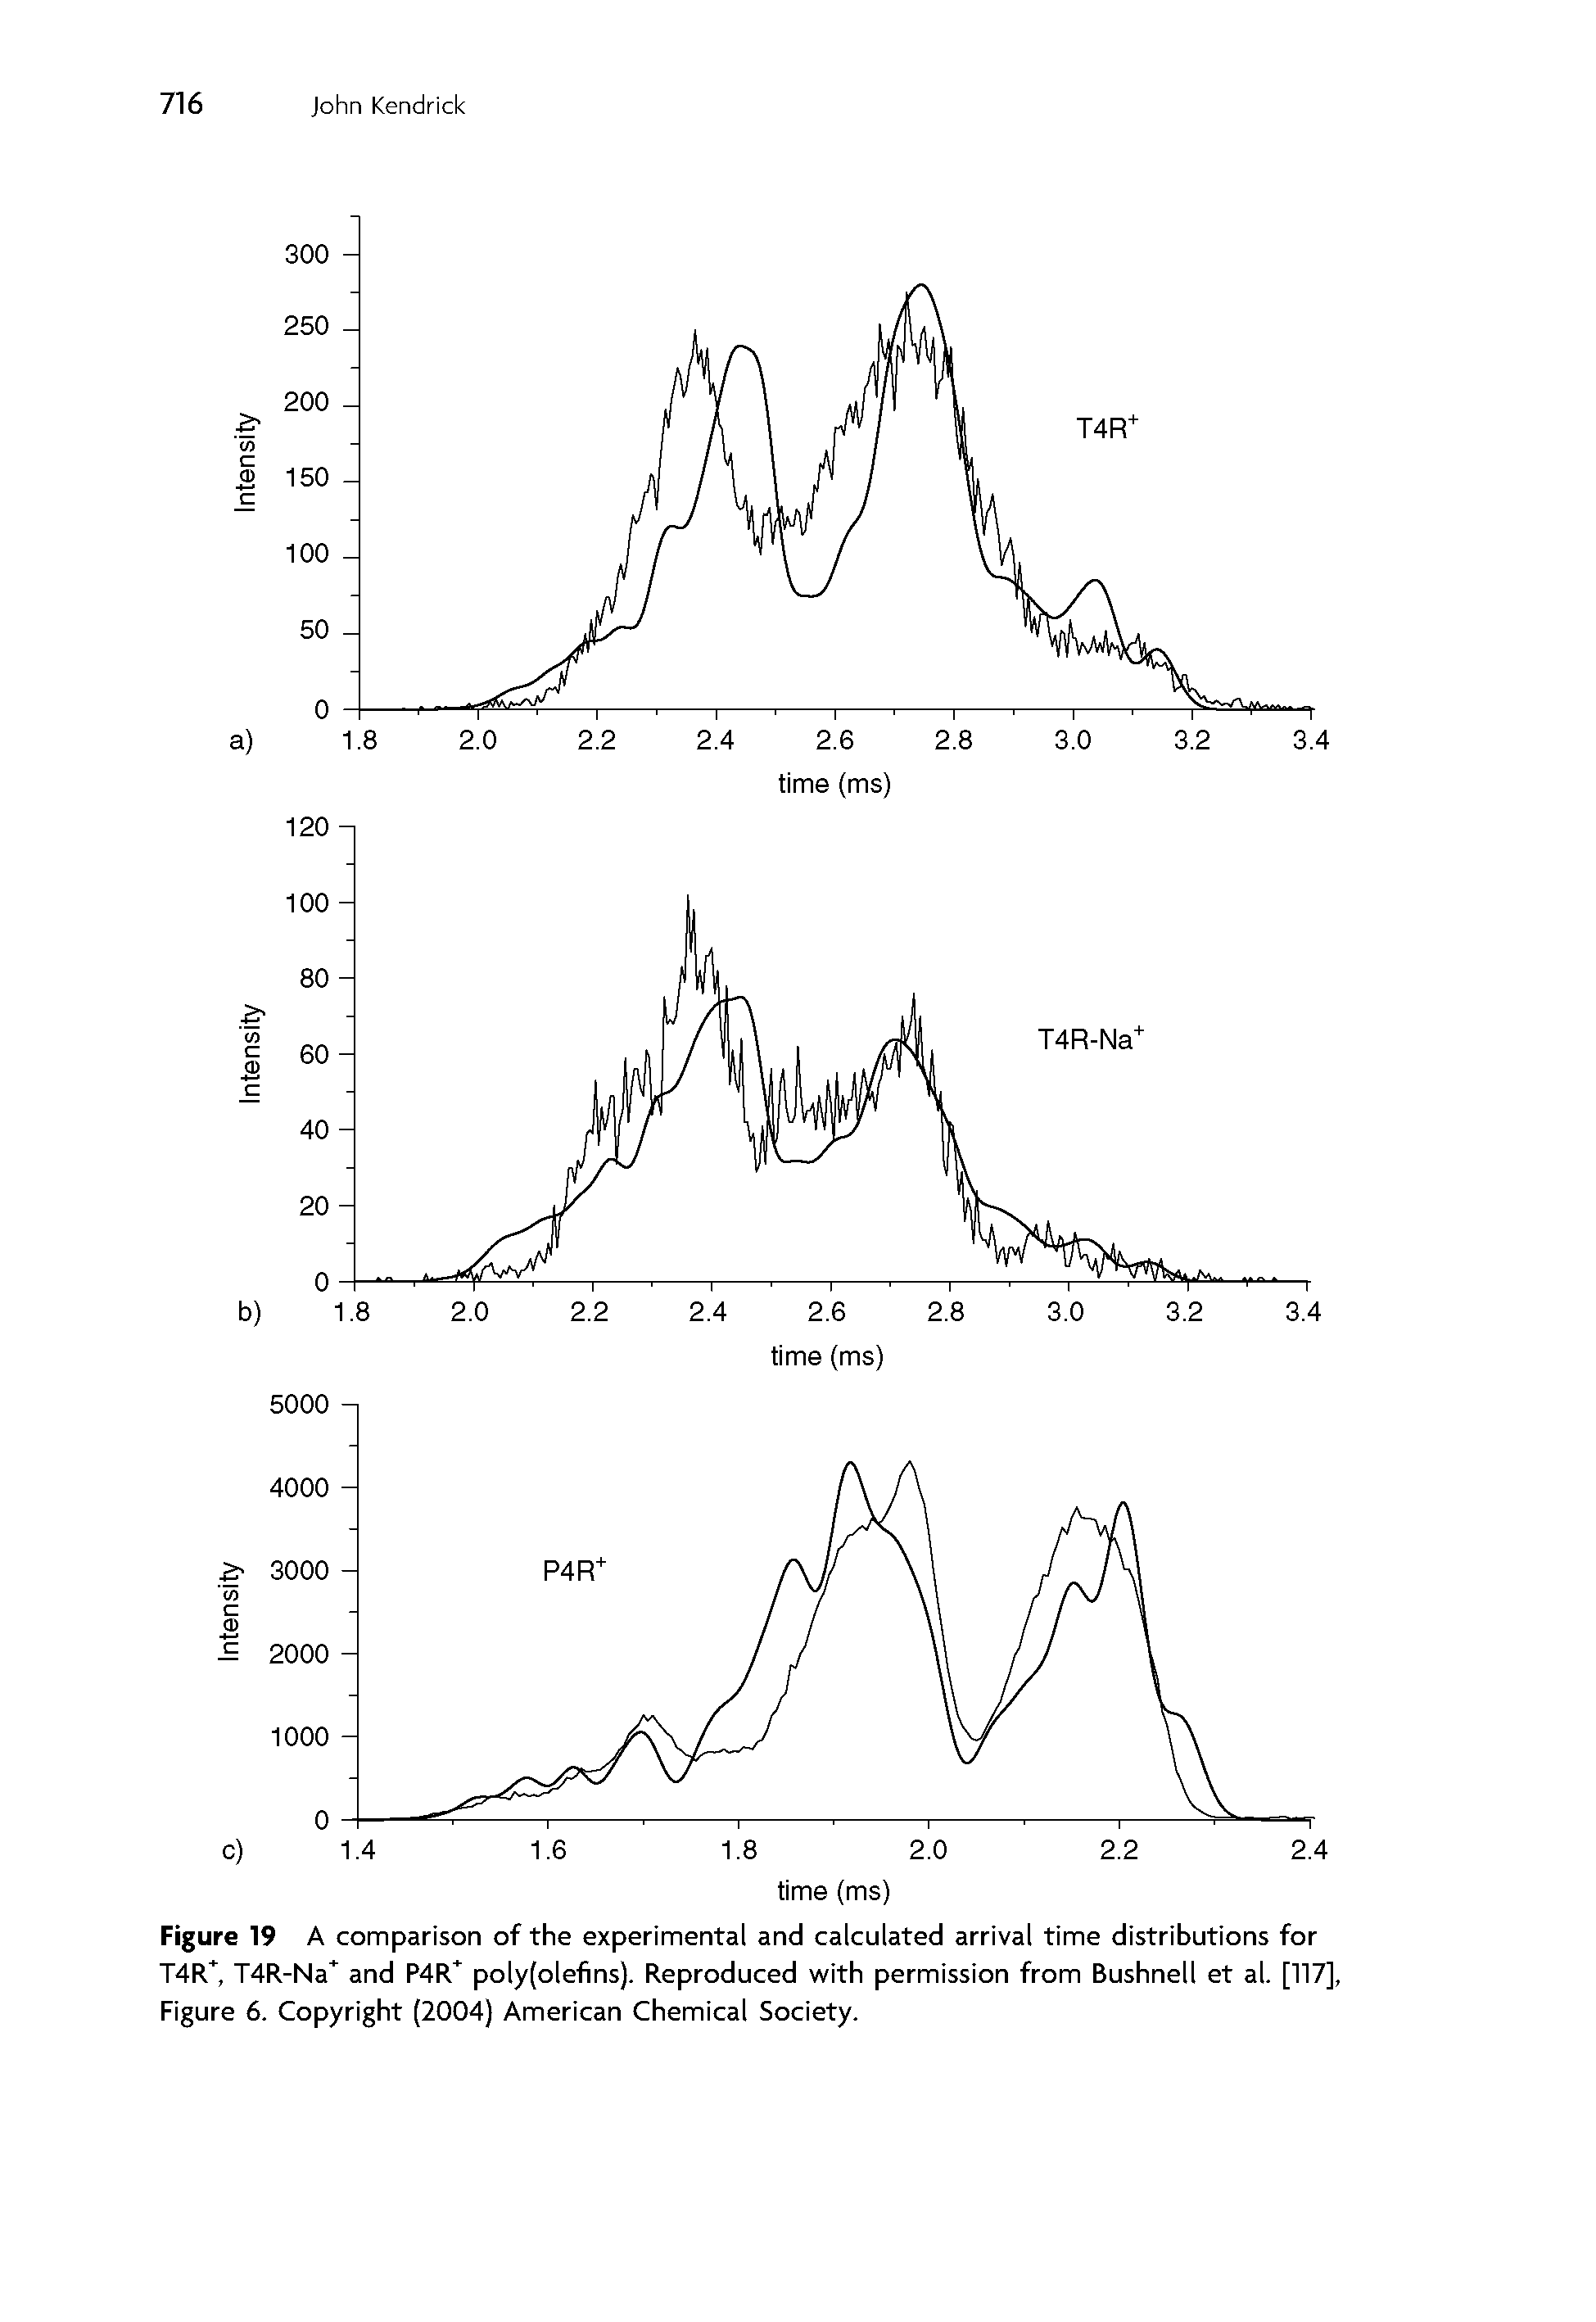 Figure 19 A comparison of the experimental and calculated arrival time distributions for T4FC, T4R-Na and P4FC poly(olefins). Reproduced with permission from Bushnell et al. [117], Figure 6. Copyright (2004) American Chemical Society.